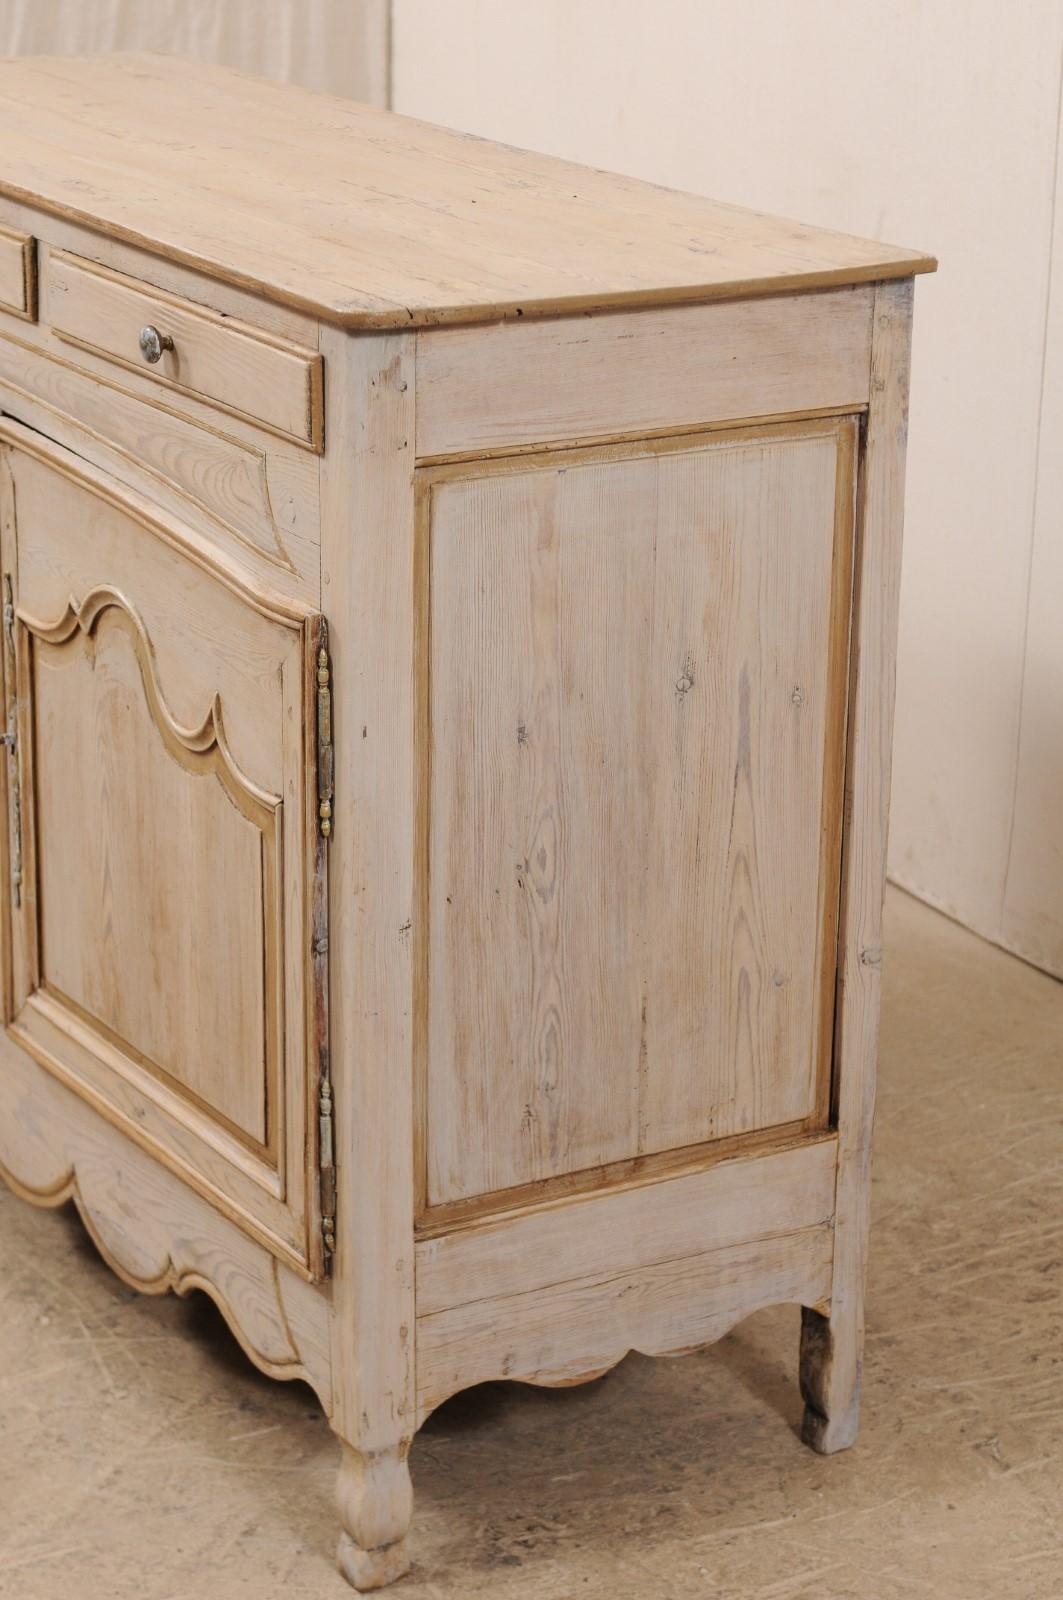 19th Century French Early 19th C. Carved & Painted Wood Buffet w/ Beautifully Scalloped Skirt